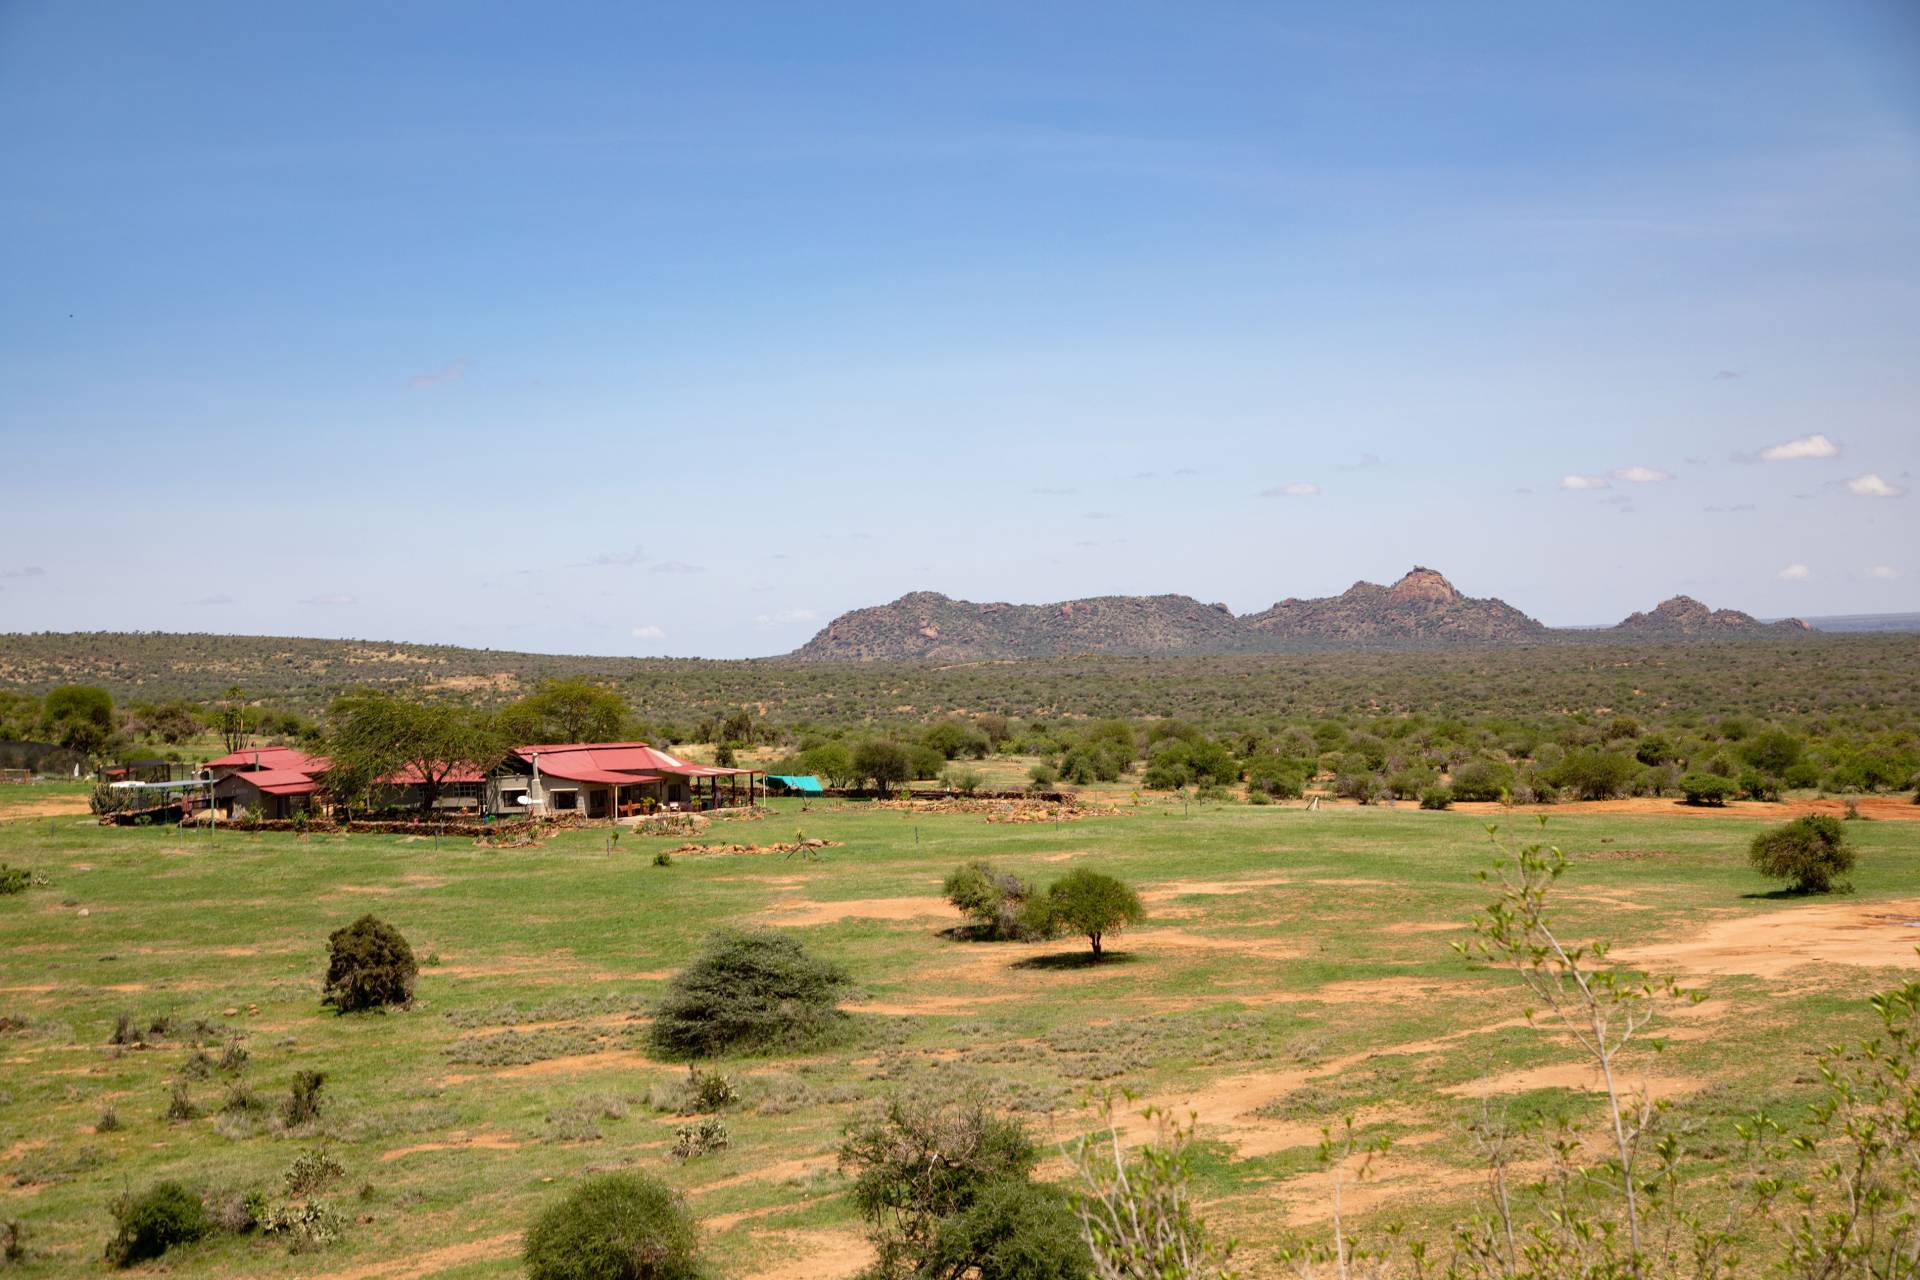 Landscape and Mpala research center